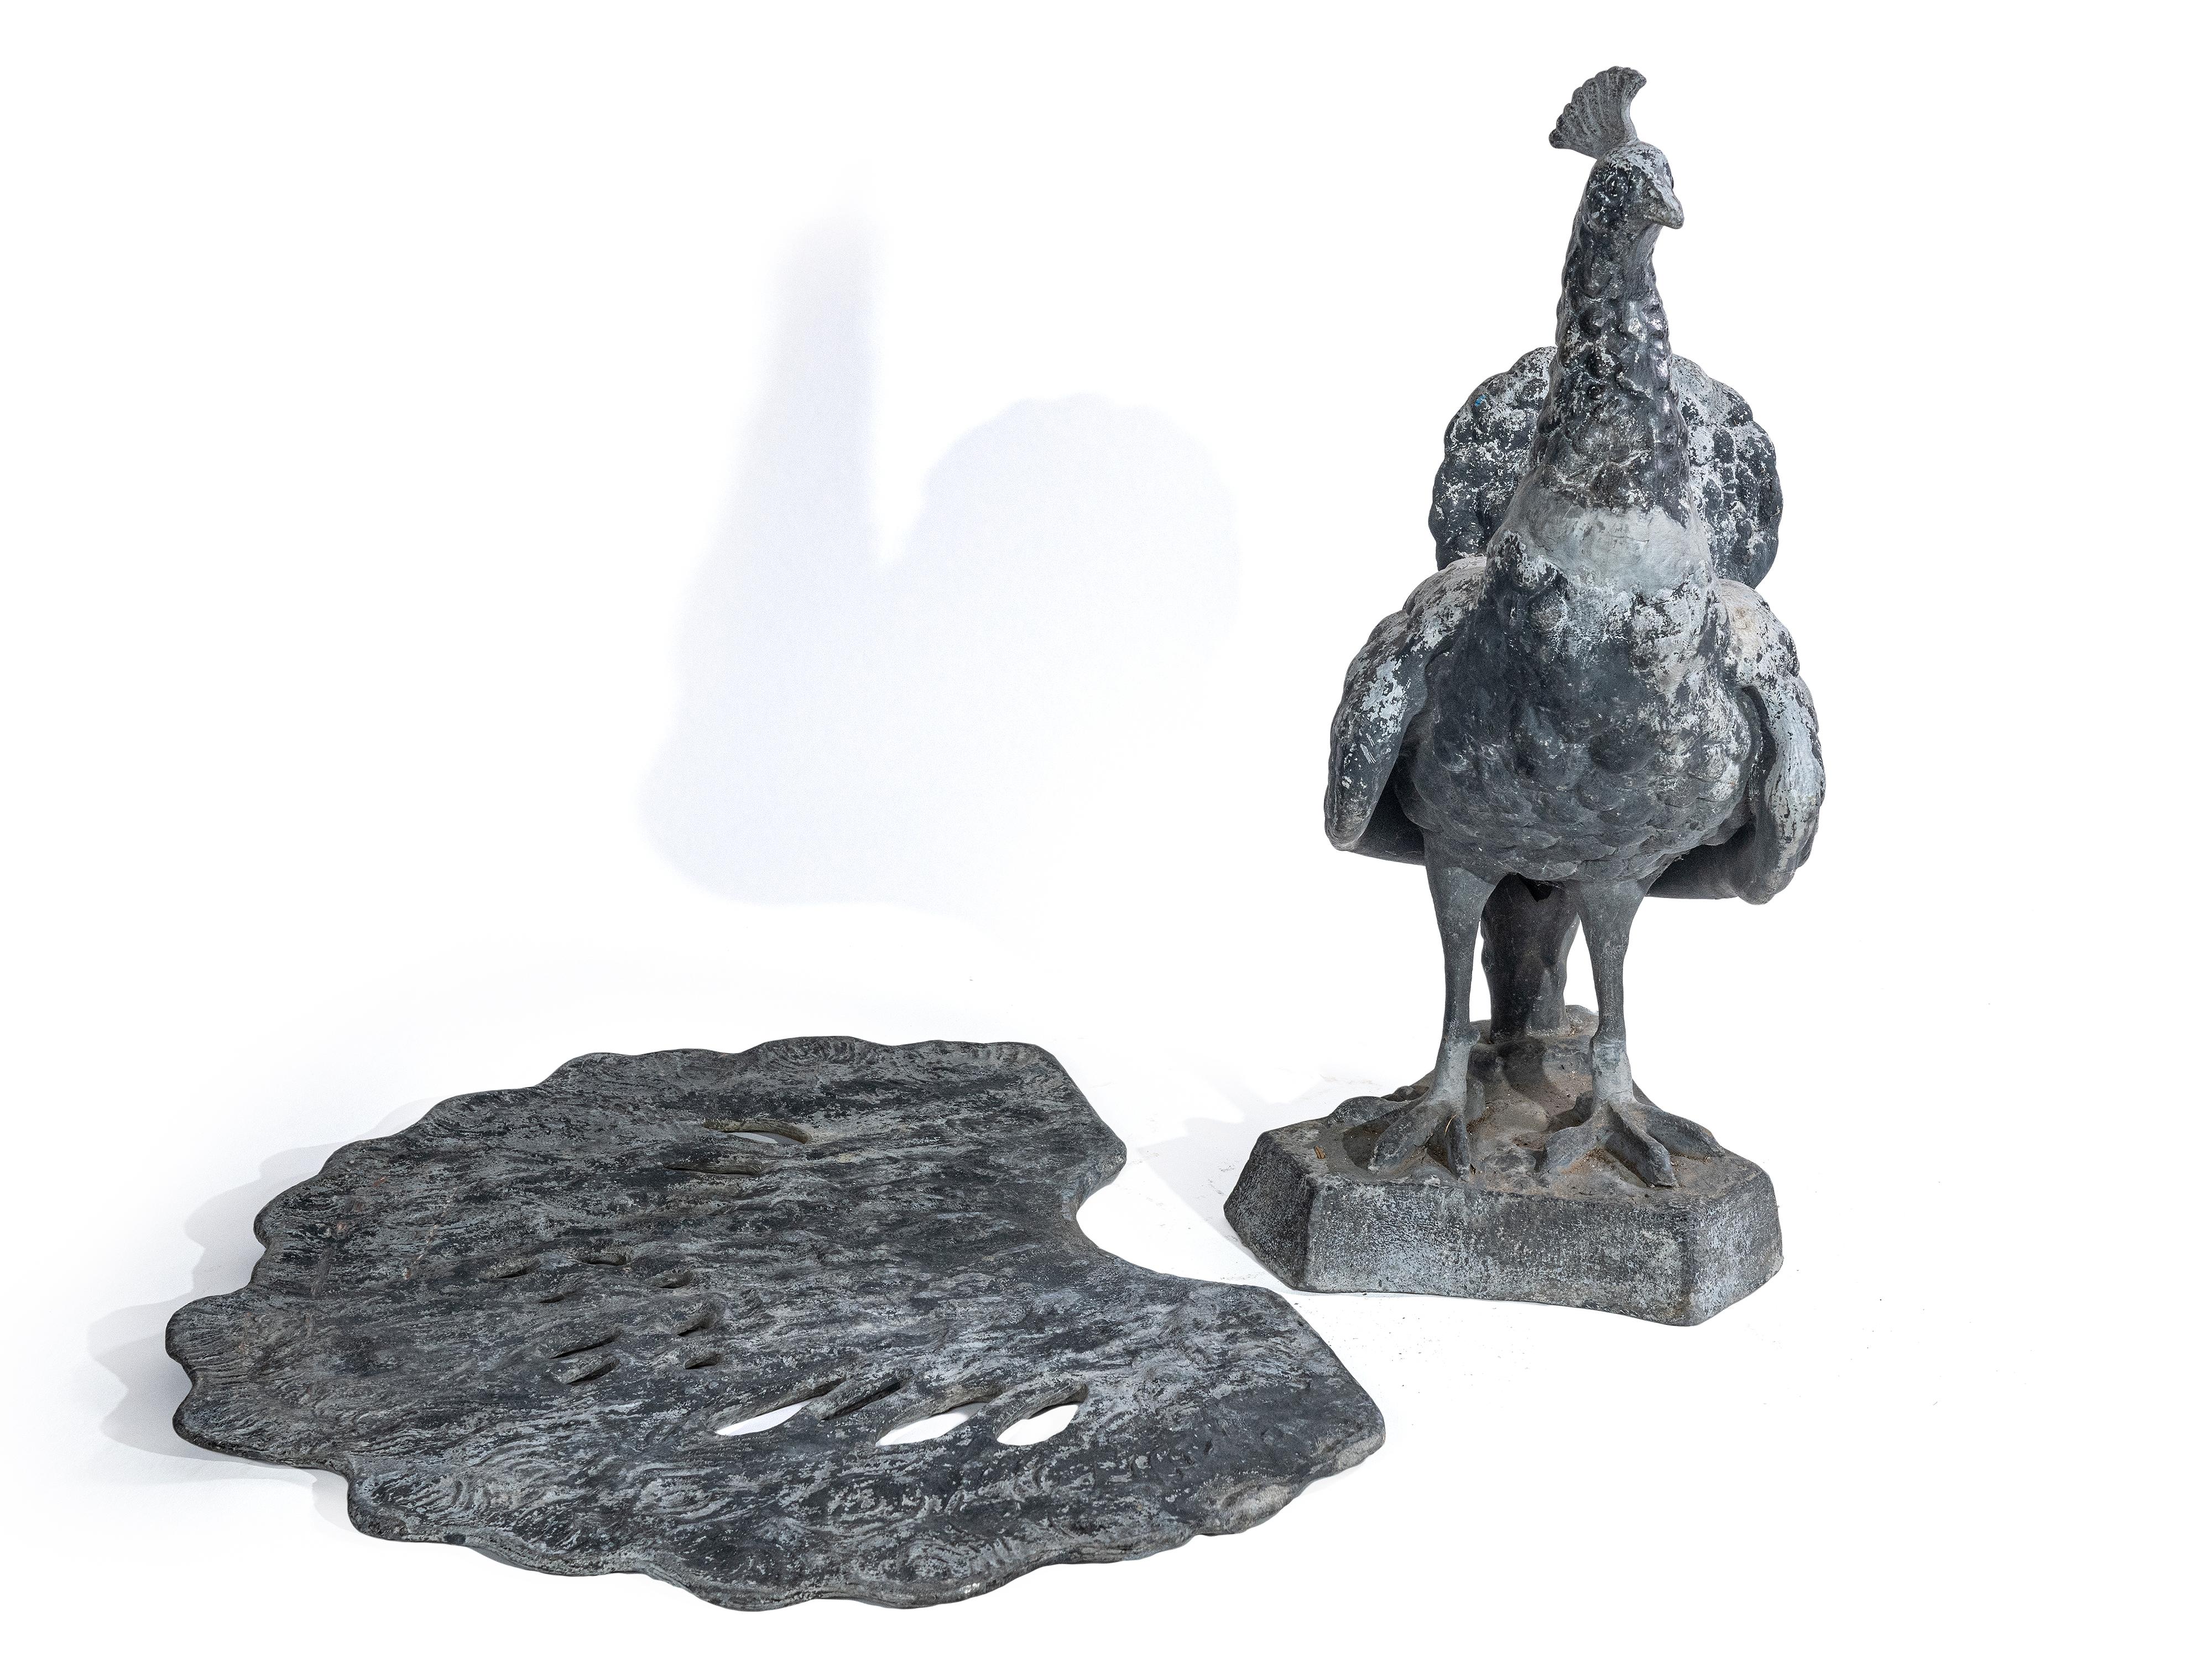 A pair of English 19th century peacock garden sculptures made of lead. 13